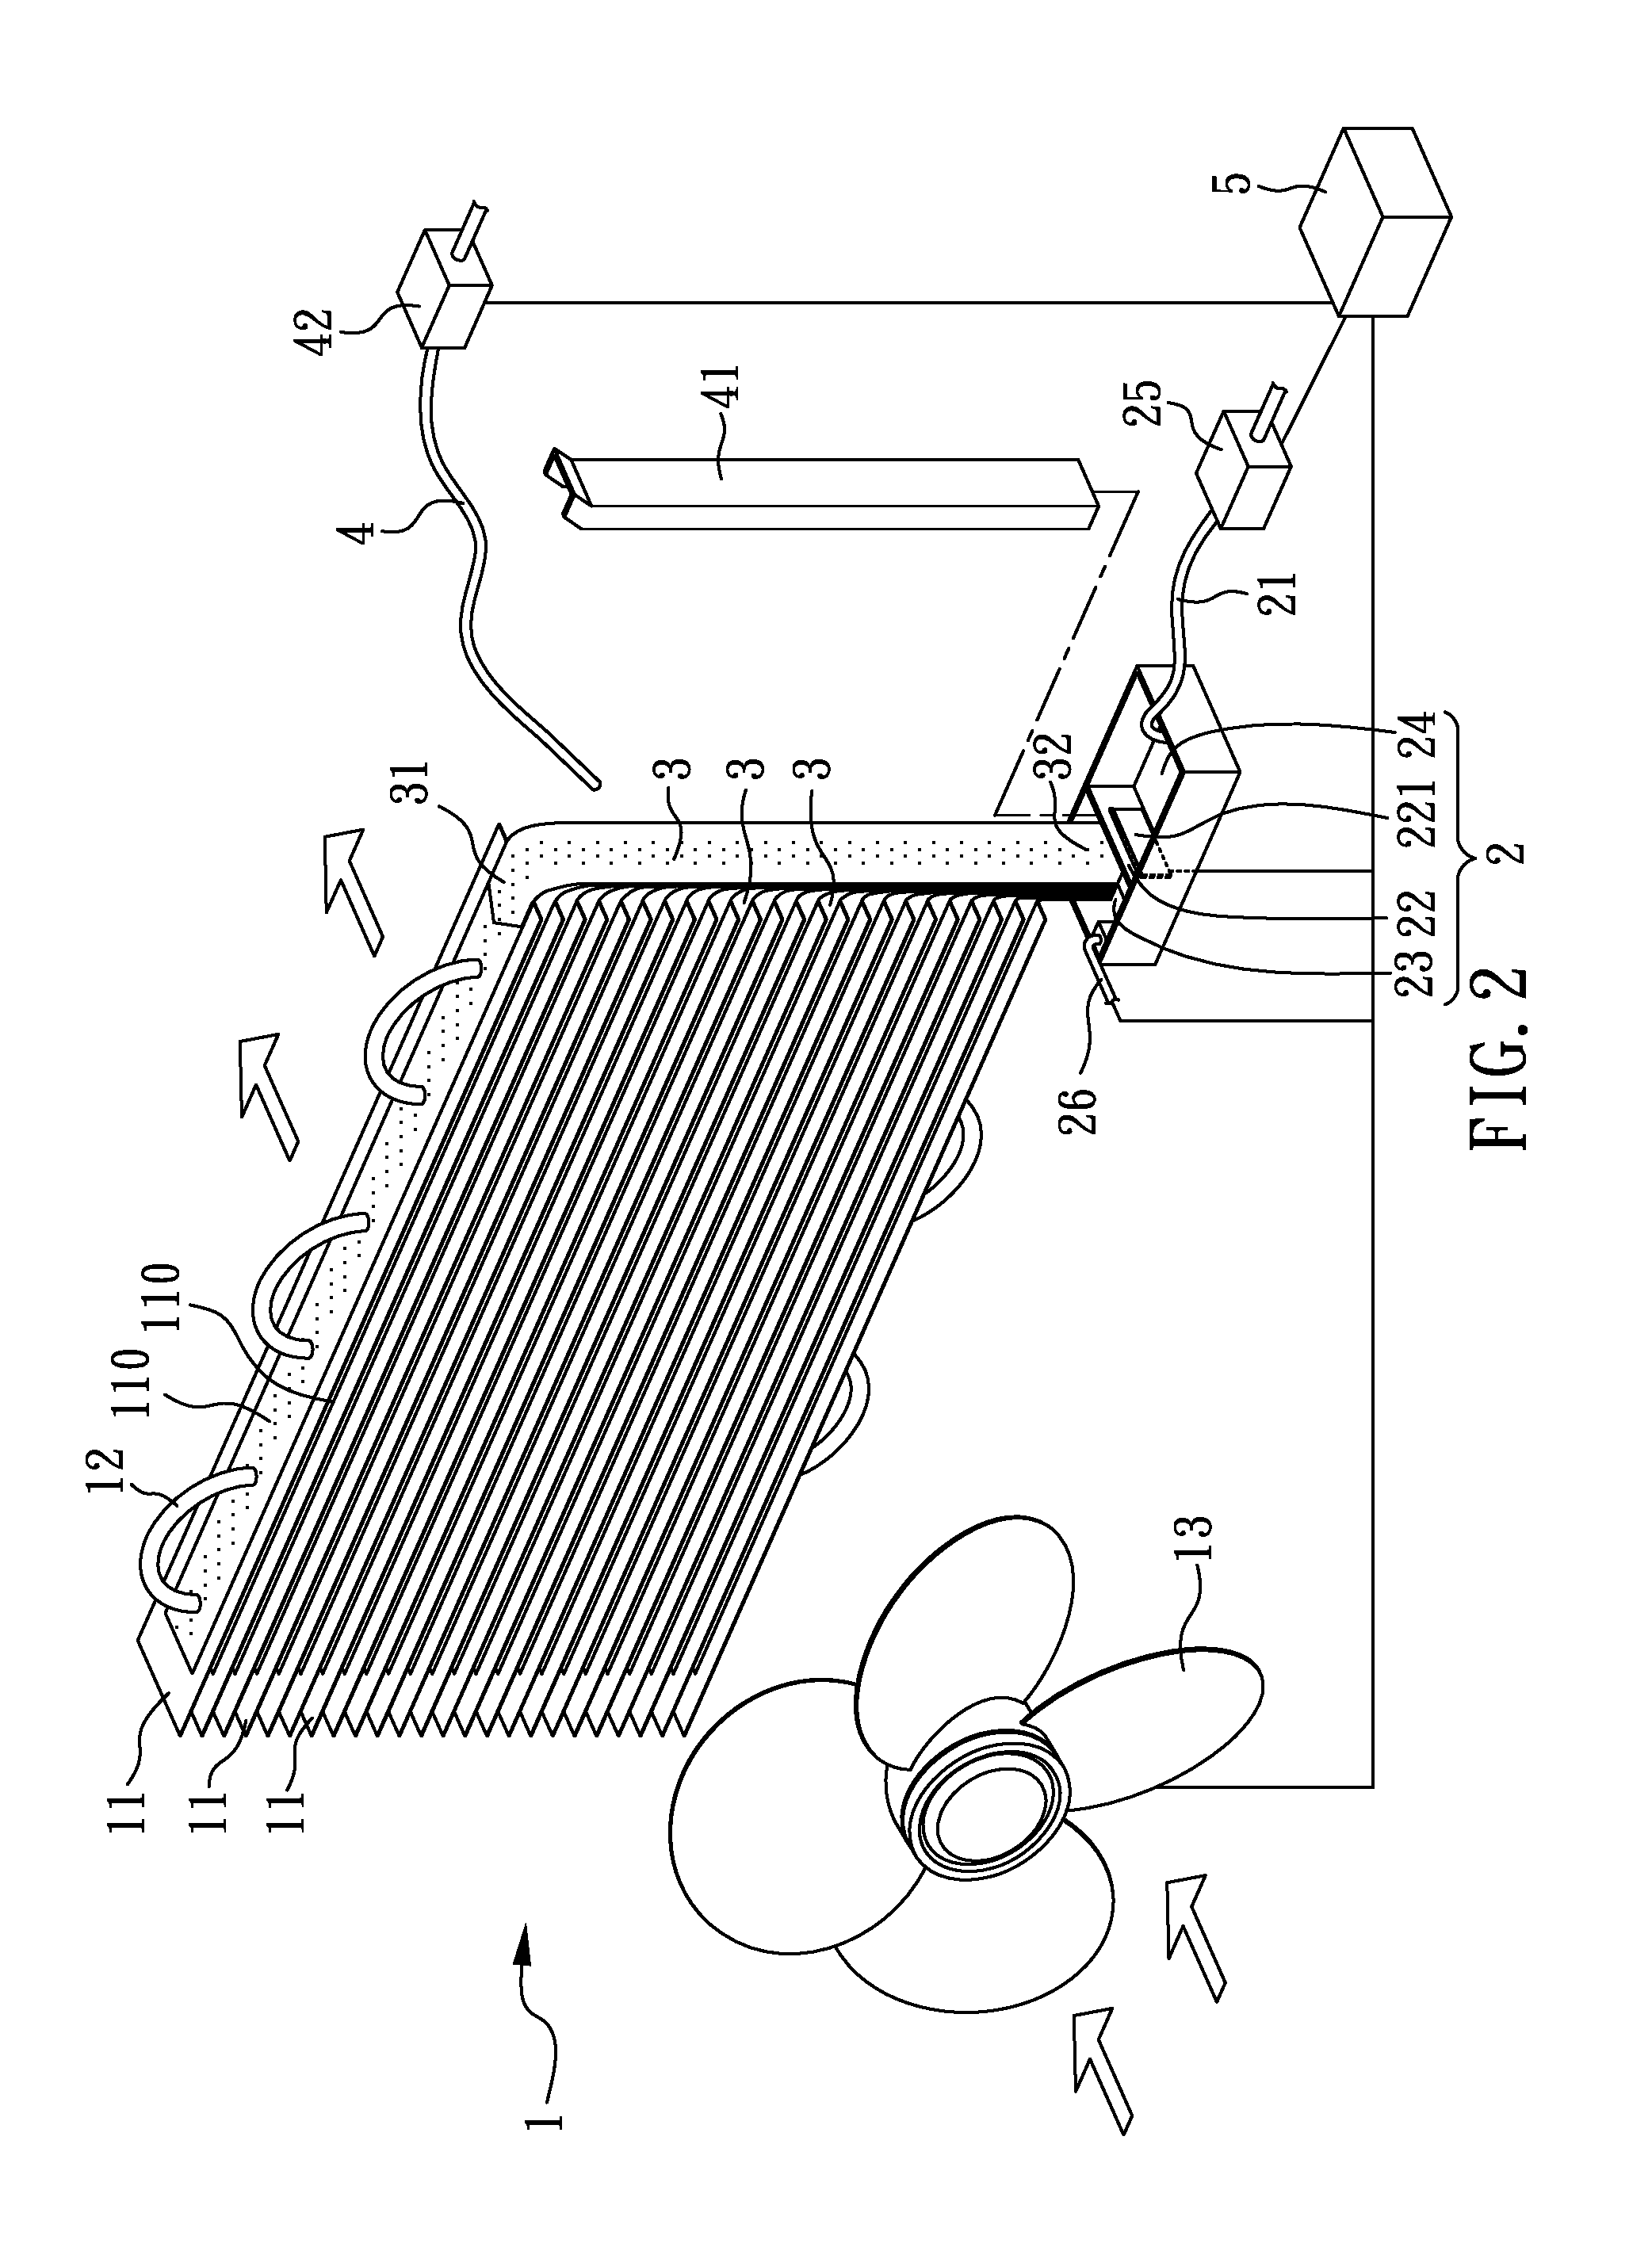 Condenser with capillary cooling device